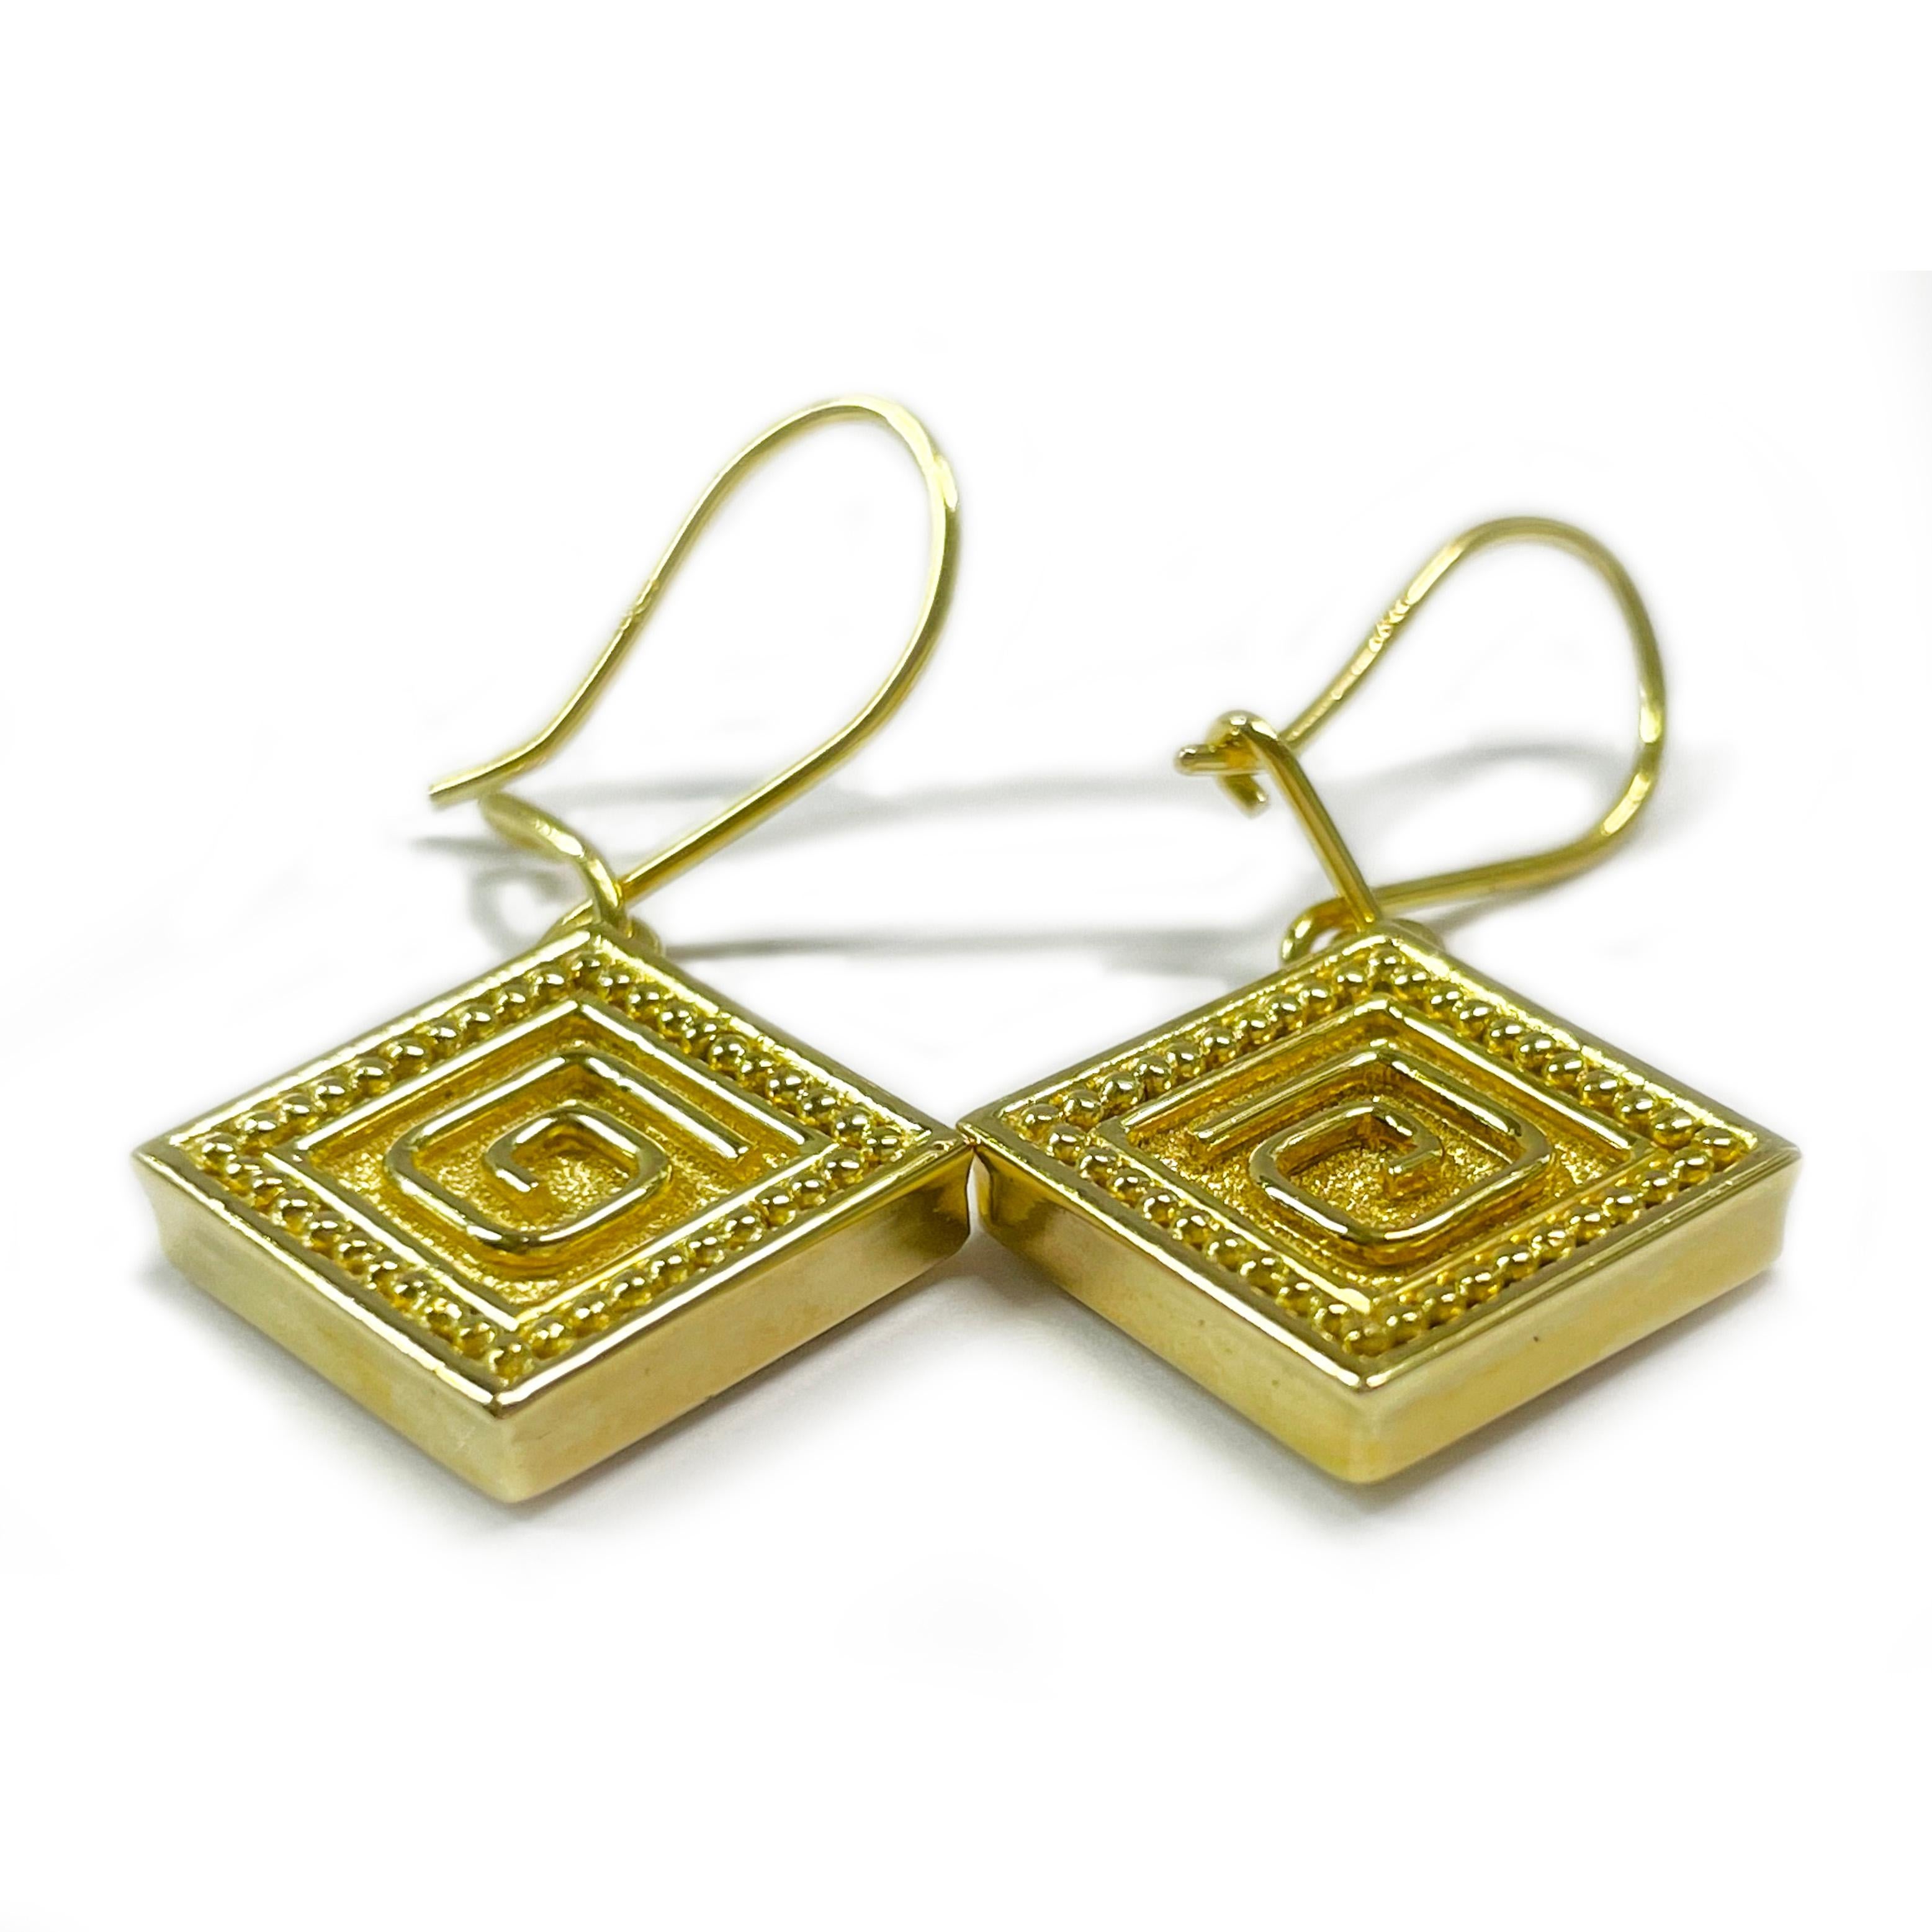 18 Karat Yellow Gold Square Dangle Earrings. The earrings feature a geometric design with gold bead surround and a stone finish. Each earring measures approximately 13.2 x 13.1 mm (not including earwire). Including the earwire the earrings measure